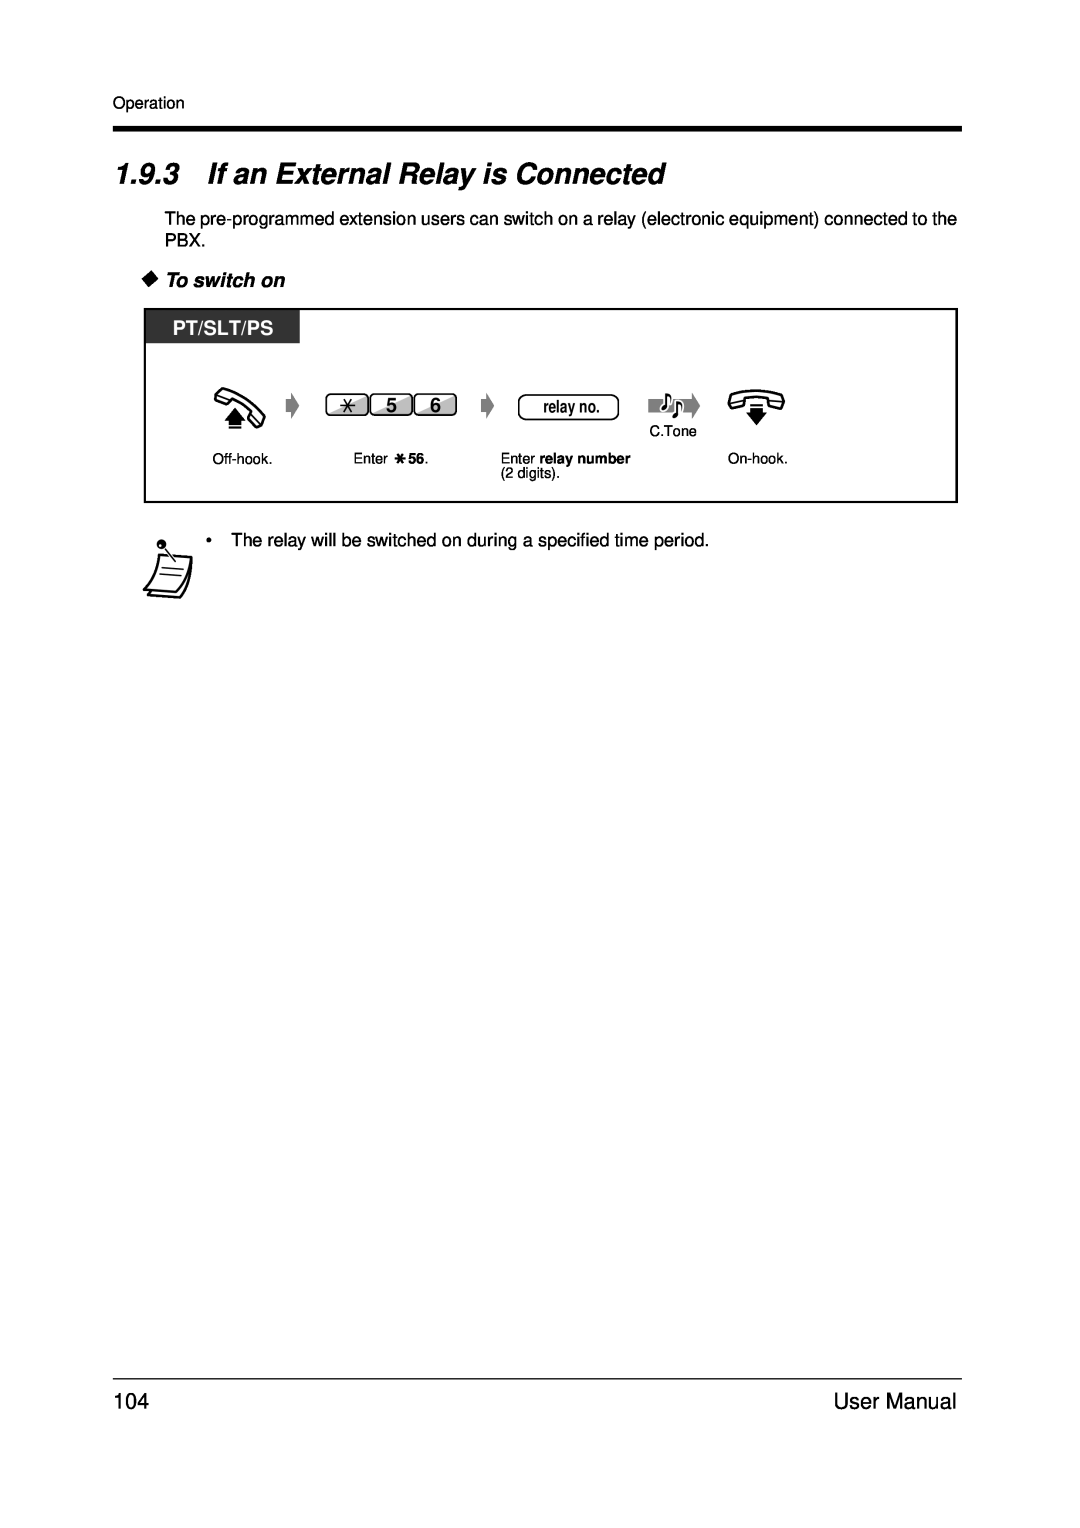 Panasonic KX-TDA200 user manual 1.9.3If an External Relay is Connected, To switch on, Pt/Slt/Ps, relay no 